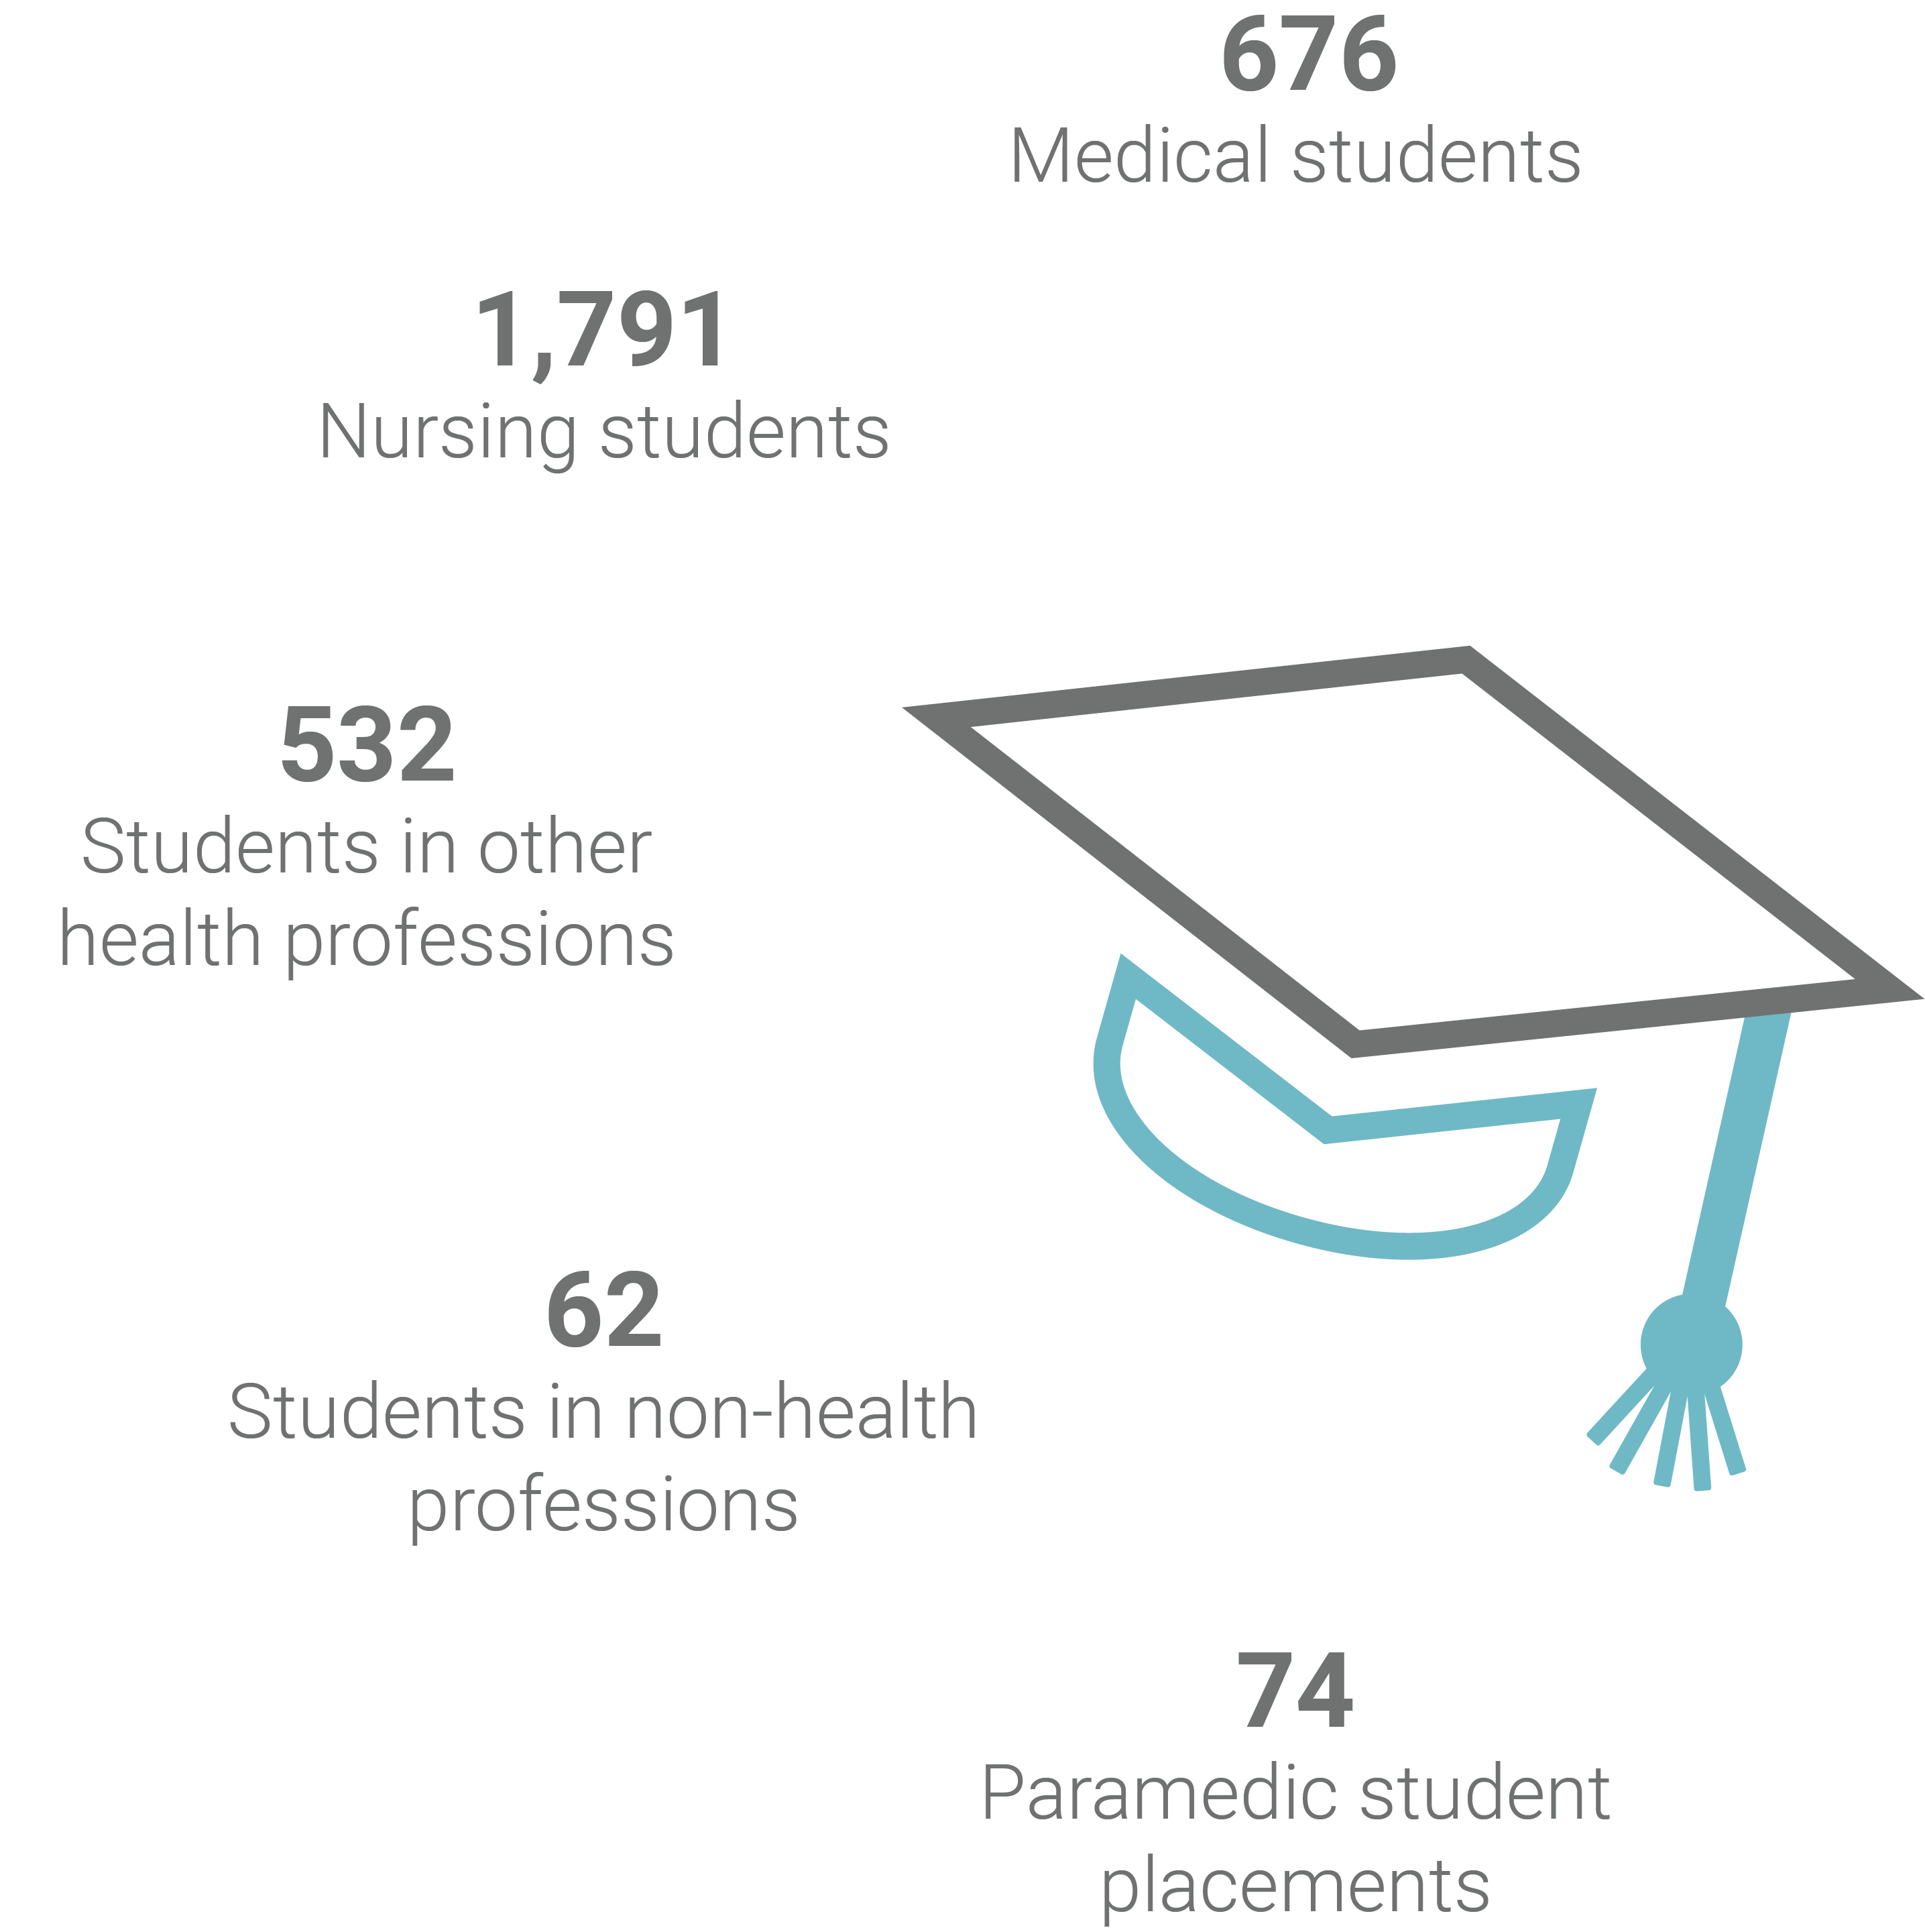 Learners's data-676 Medical students, 1791 Nursing students, 532 Students in other health professions, 62 Students in non-health professions, 74 Paramedic student